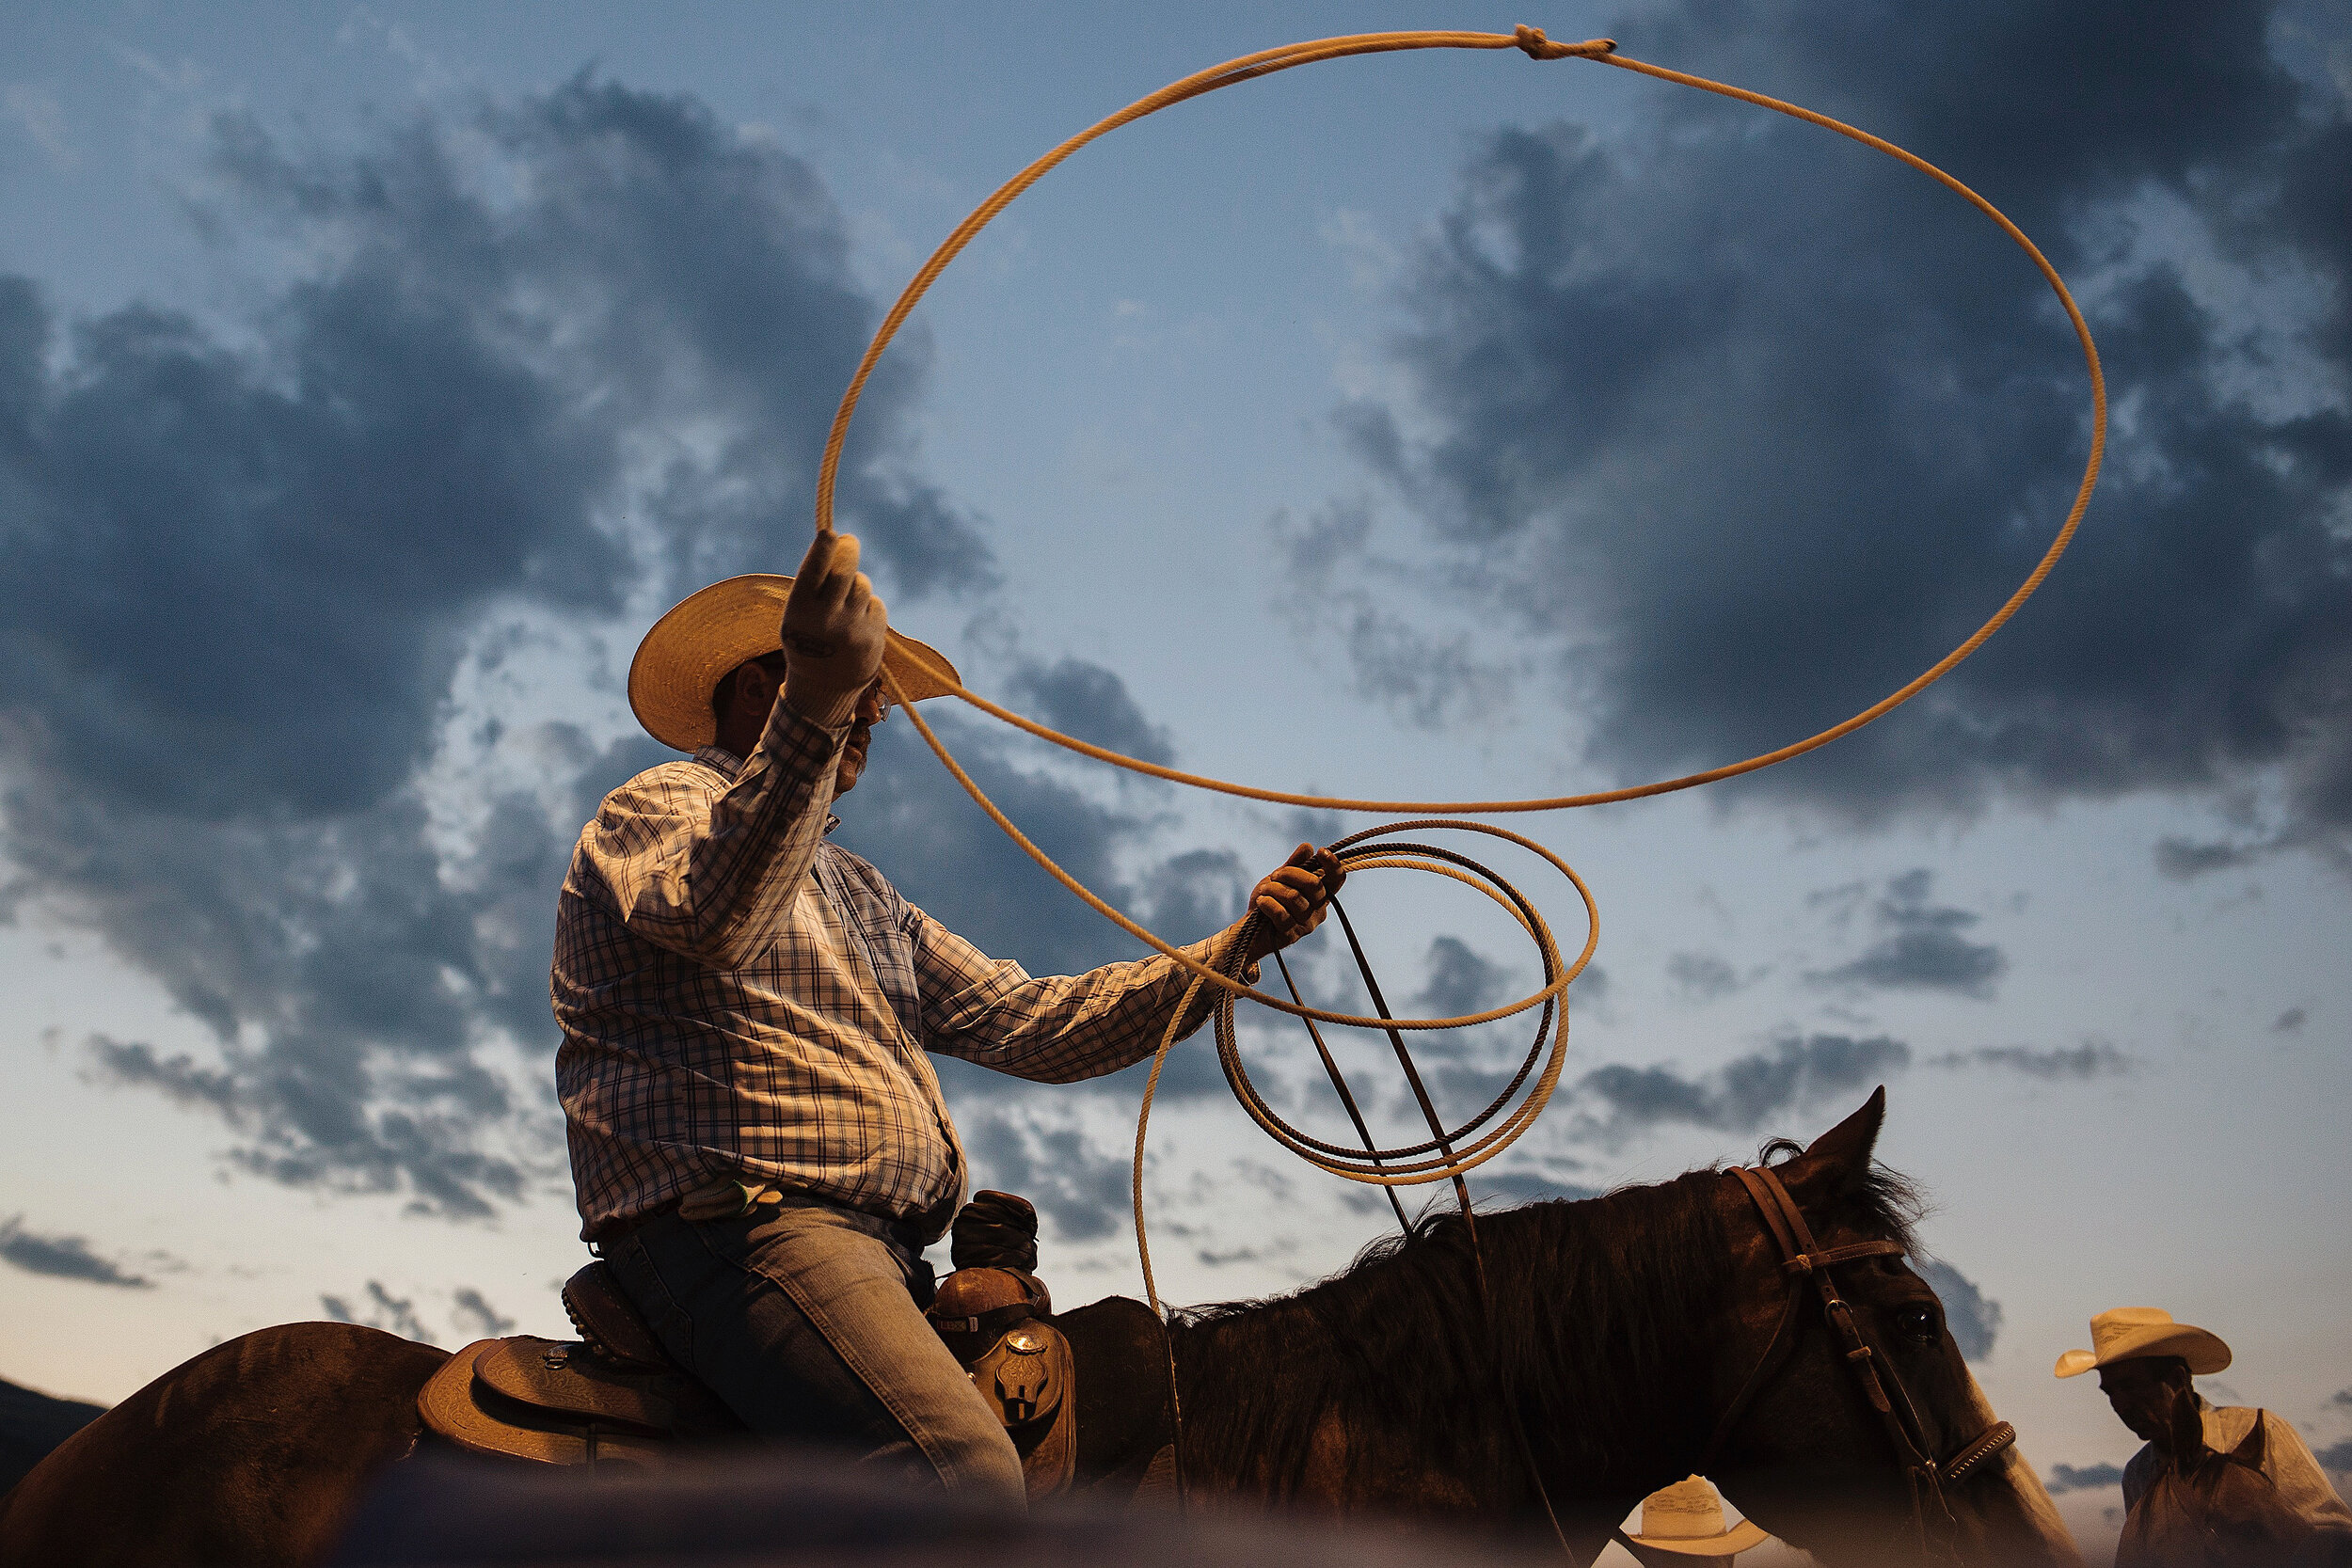  Cody, WY – Rodeo Capitol of the World. August, 2015. 